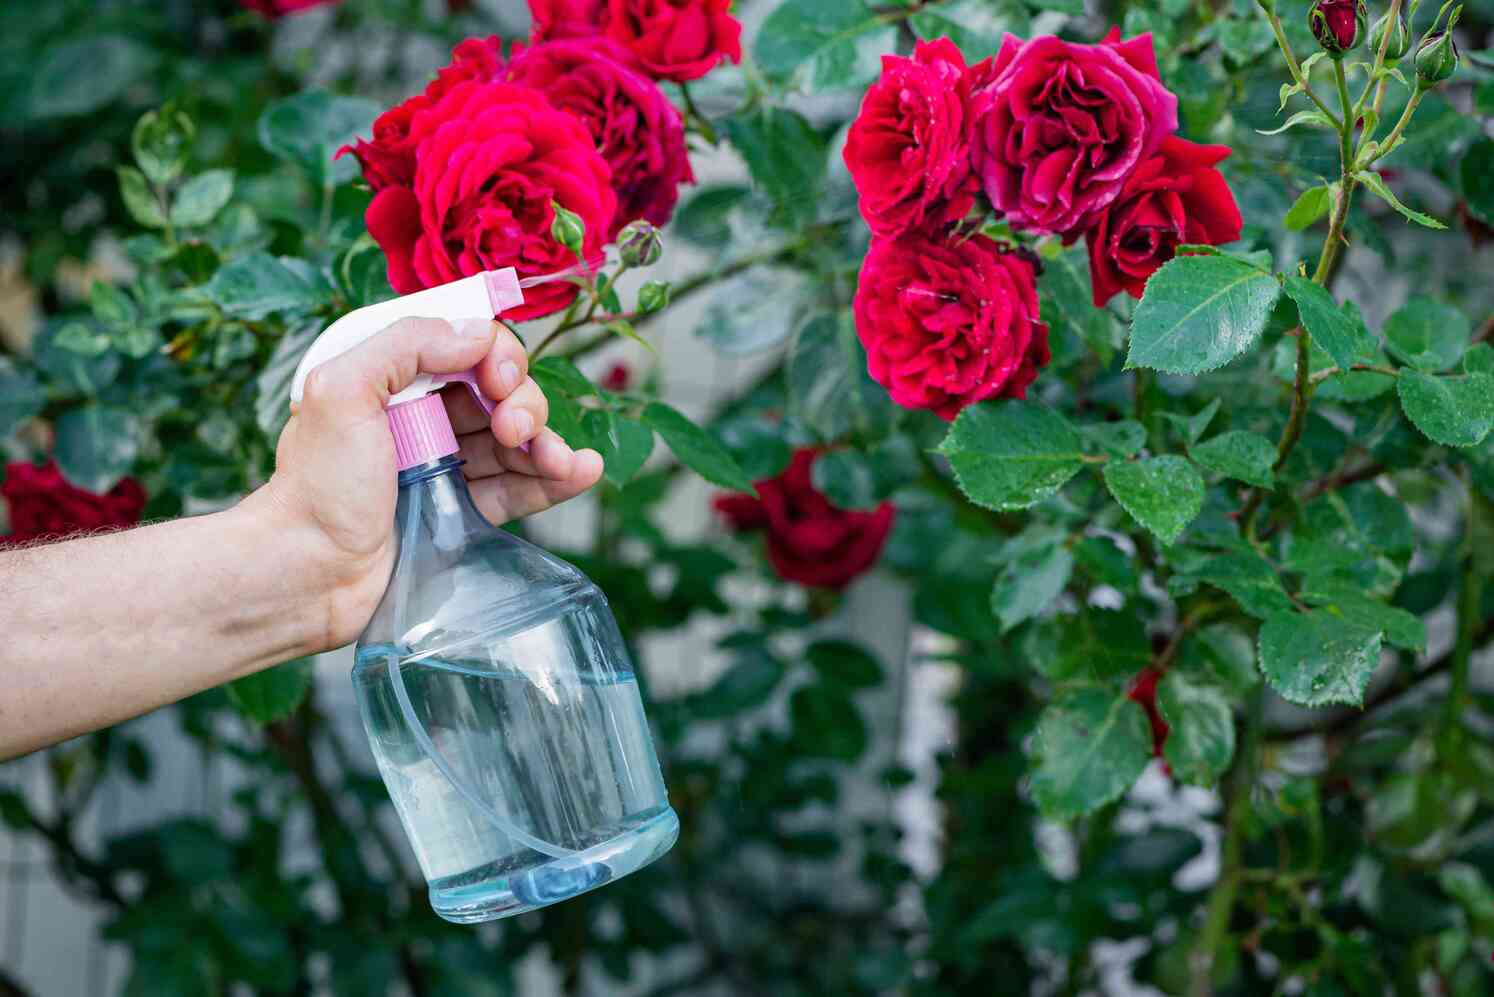 How To Remove Pesticides From Rose Petals